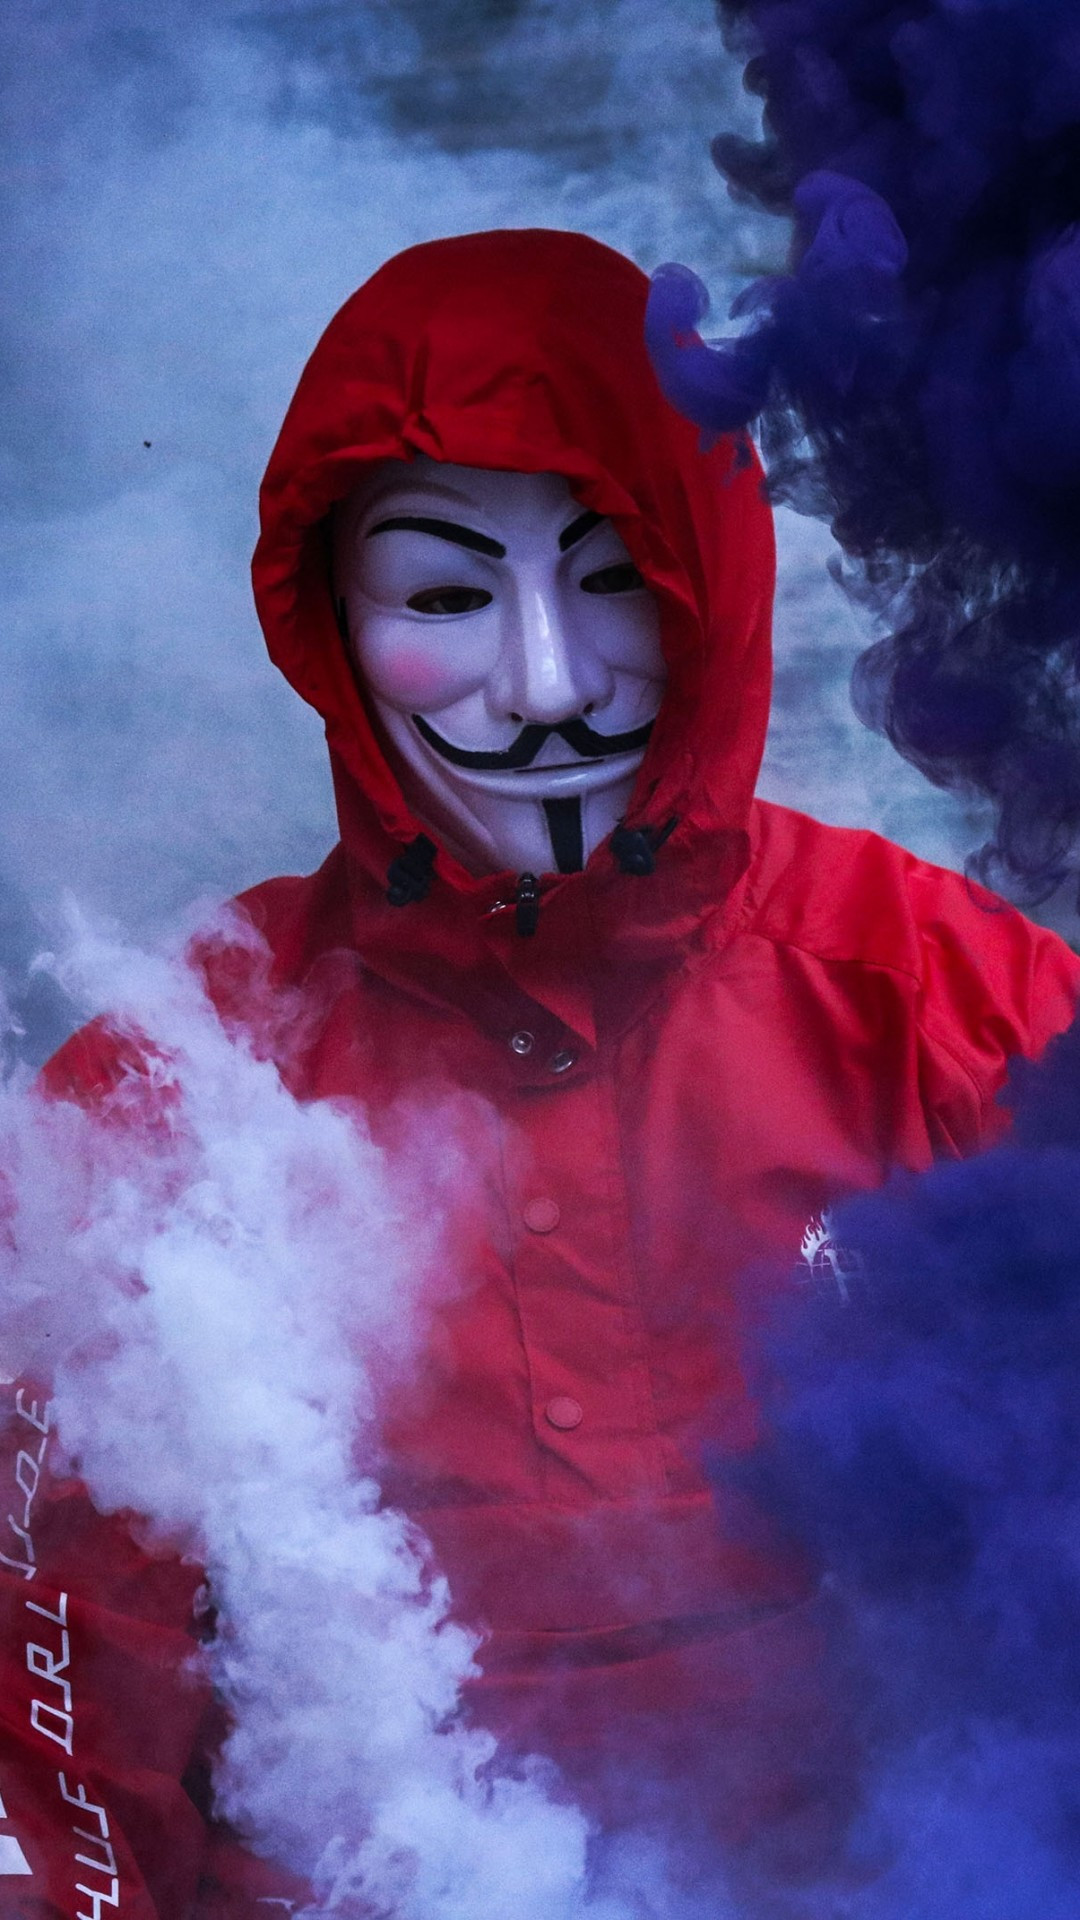 Download 1080x1920 Guy Fawkes Mask, Anonymous, Smoke, Red Hoodie Wallpaper for iPhone iPhone 7 Plus, iPhone 6+, Sony Xperia Z, HTC One